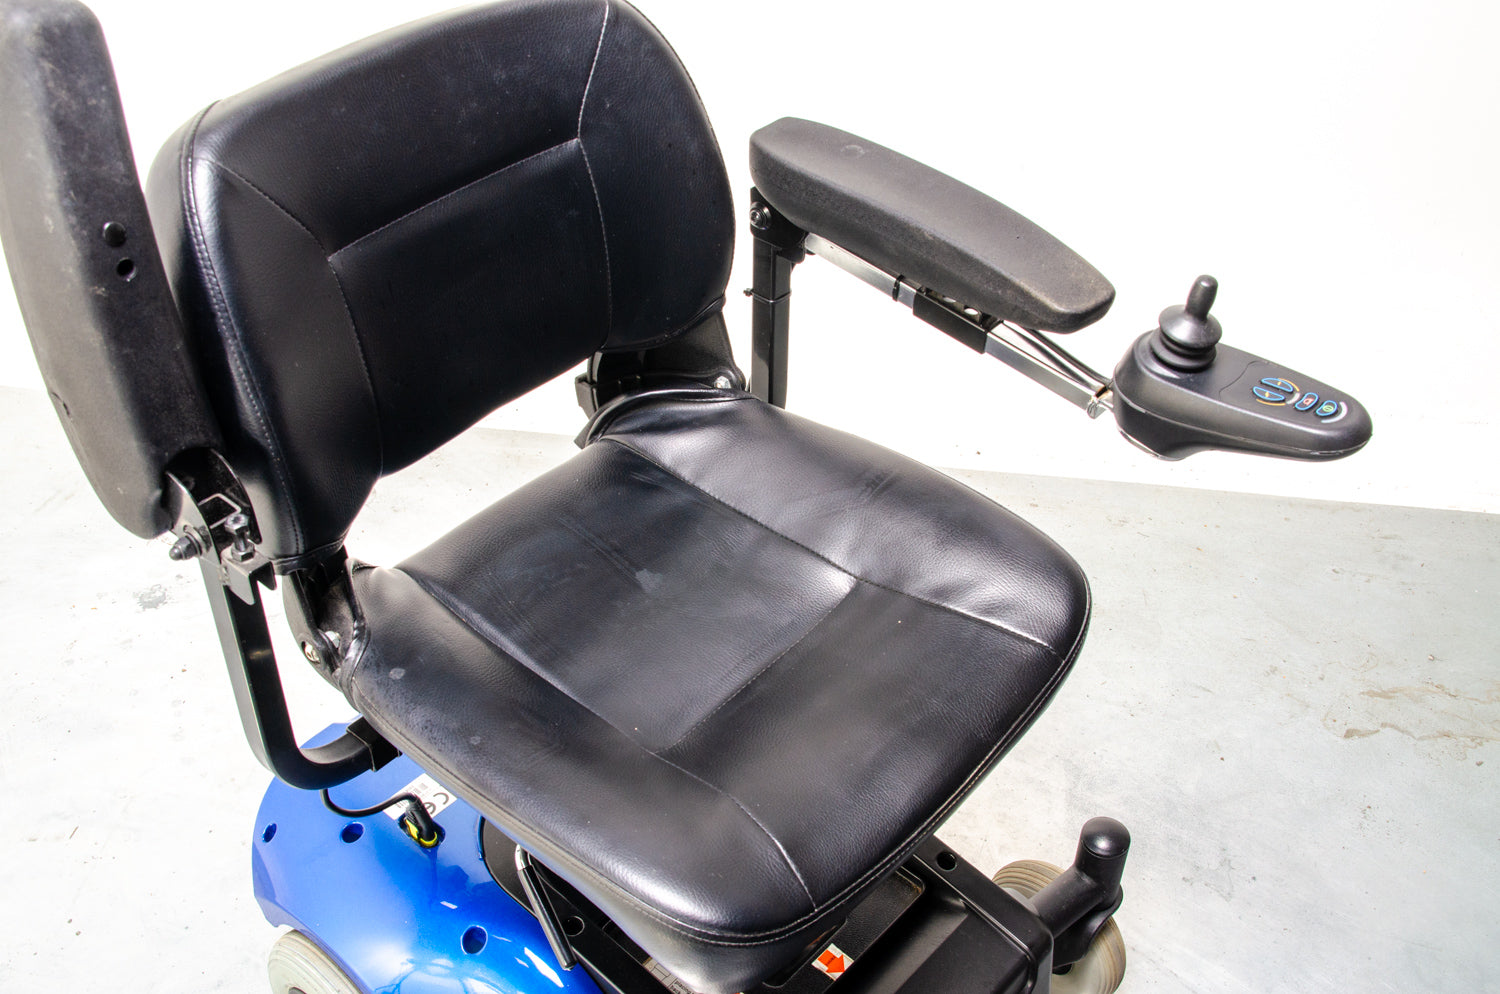 CareCo Easi Go Used Electric Wheelchair Powerchair Indoor Transportable Lightweight